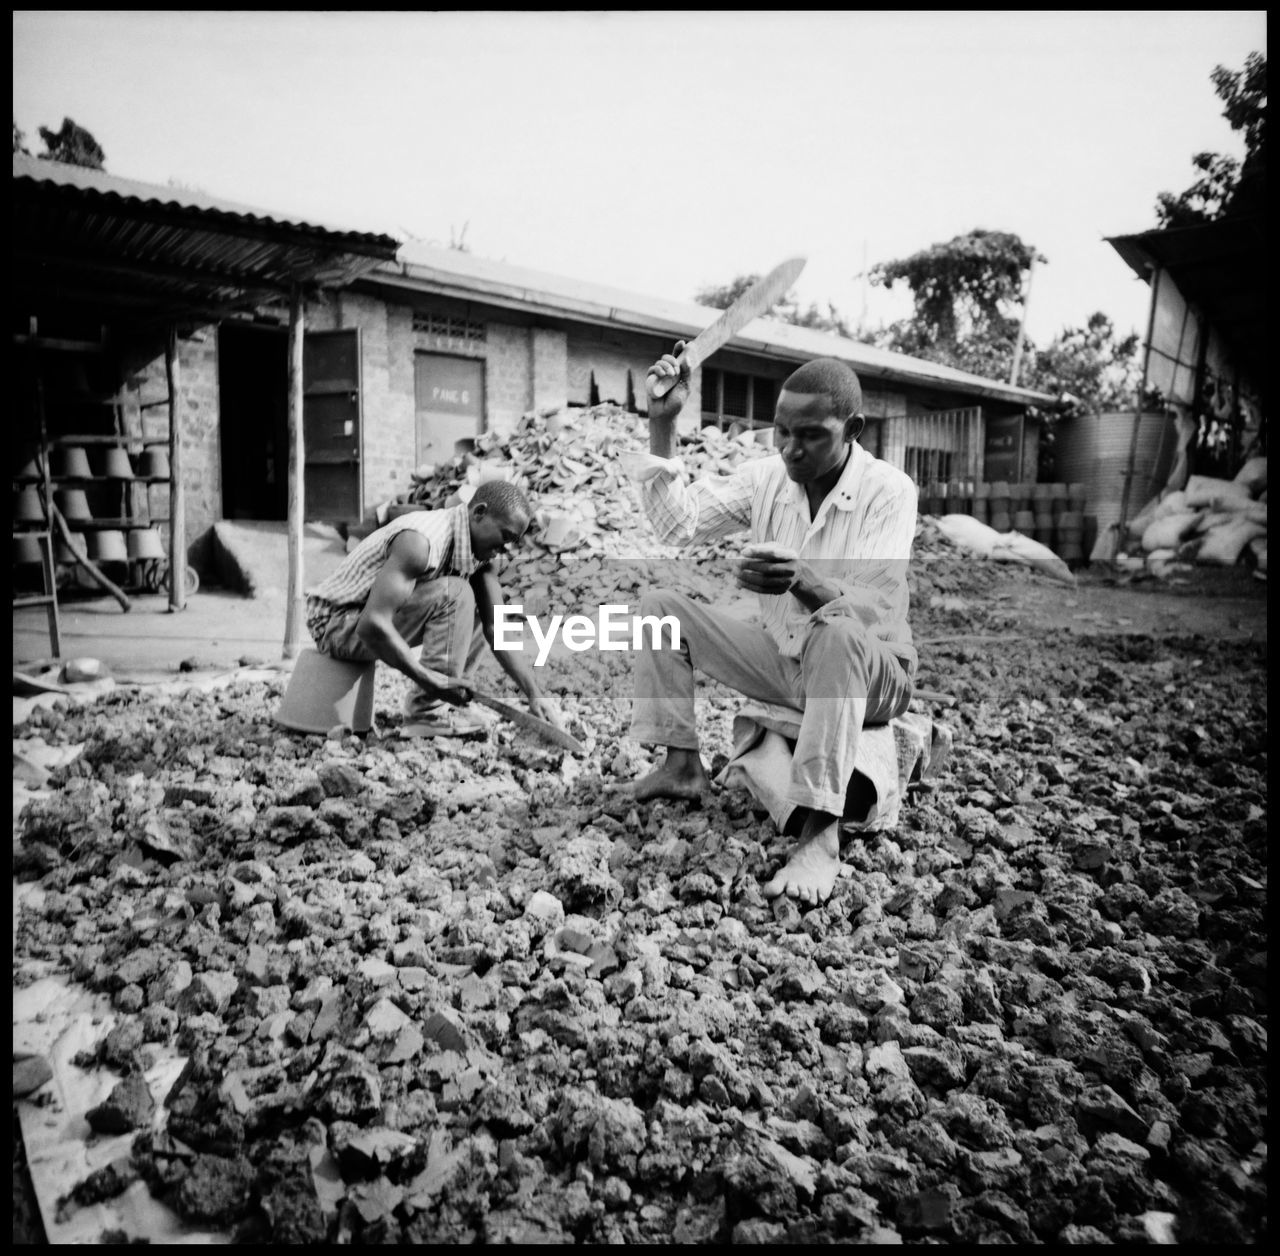 The filter production of Spouts of Water in Kampala Africa Analogue Photography Black And White Boat Bussi Island Clay East Africa Entebbe Ferry Ferryman Film Photography Filter Production Grain Kampala Machete Medium Format Outdoors Portrait Social Business Summer The Photojournalist - 2017 EyeEm Awards Uganda  Victoria Lake Water